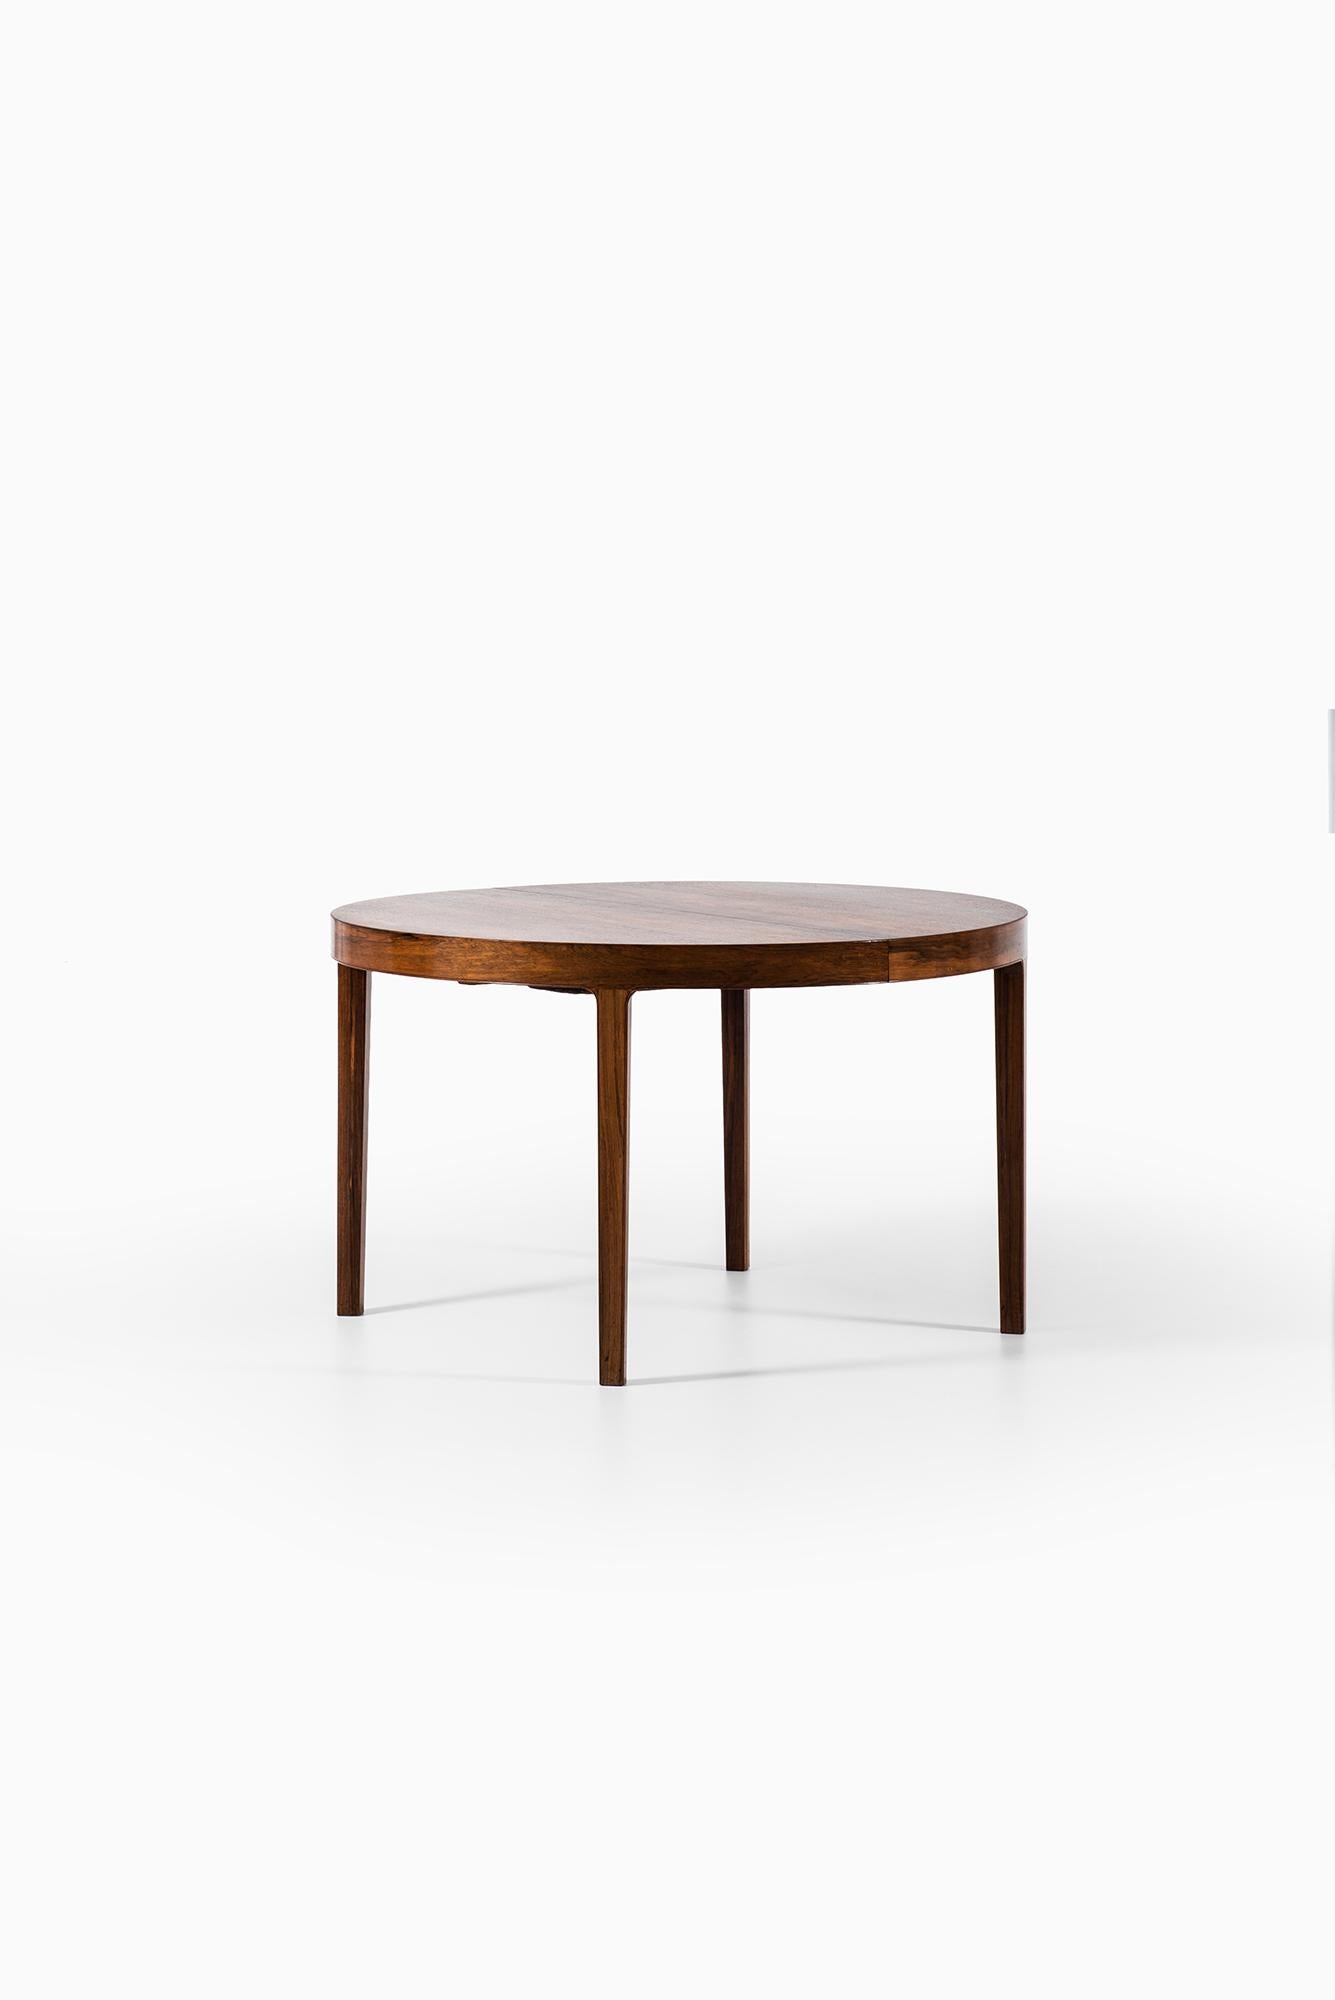 Ole Wanscher Large Dining Table by Cabinetmaker A.J. Iversen in Denmark 3